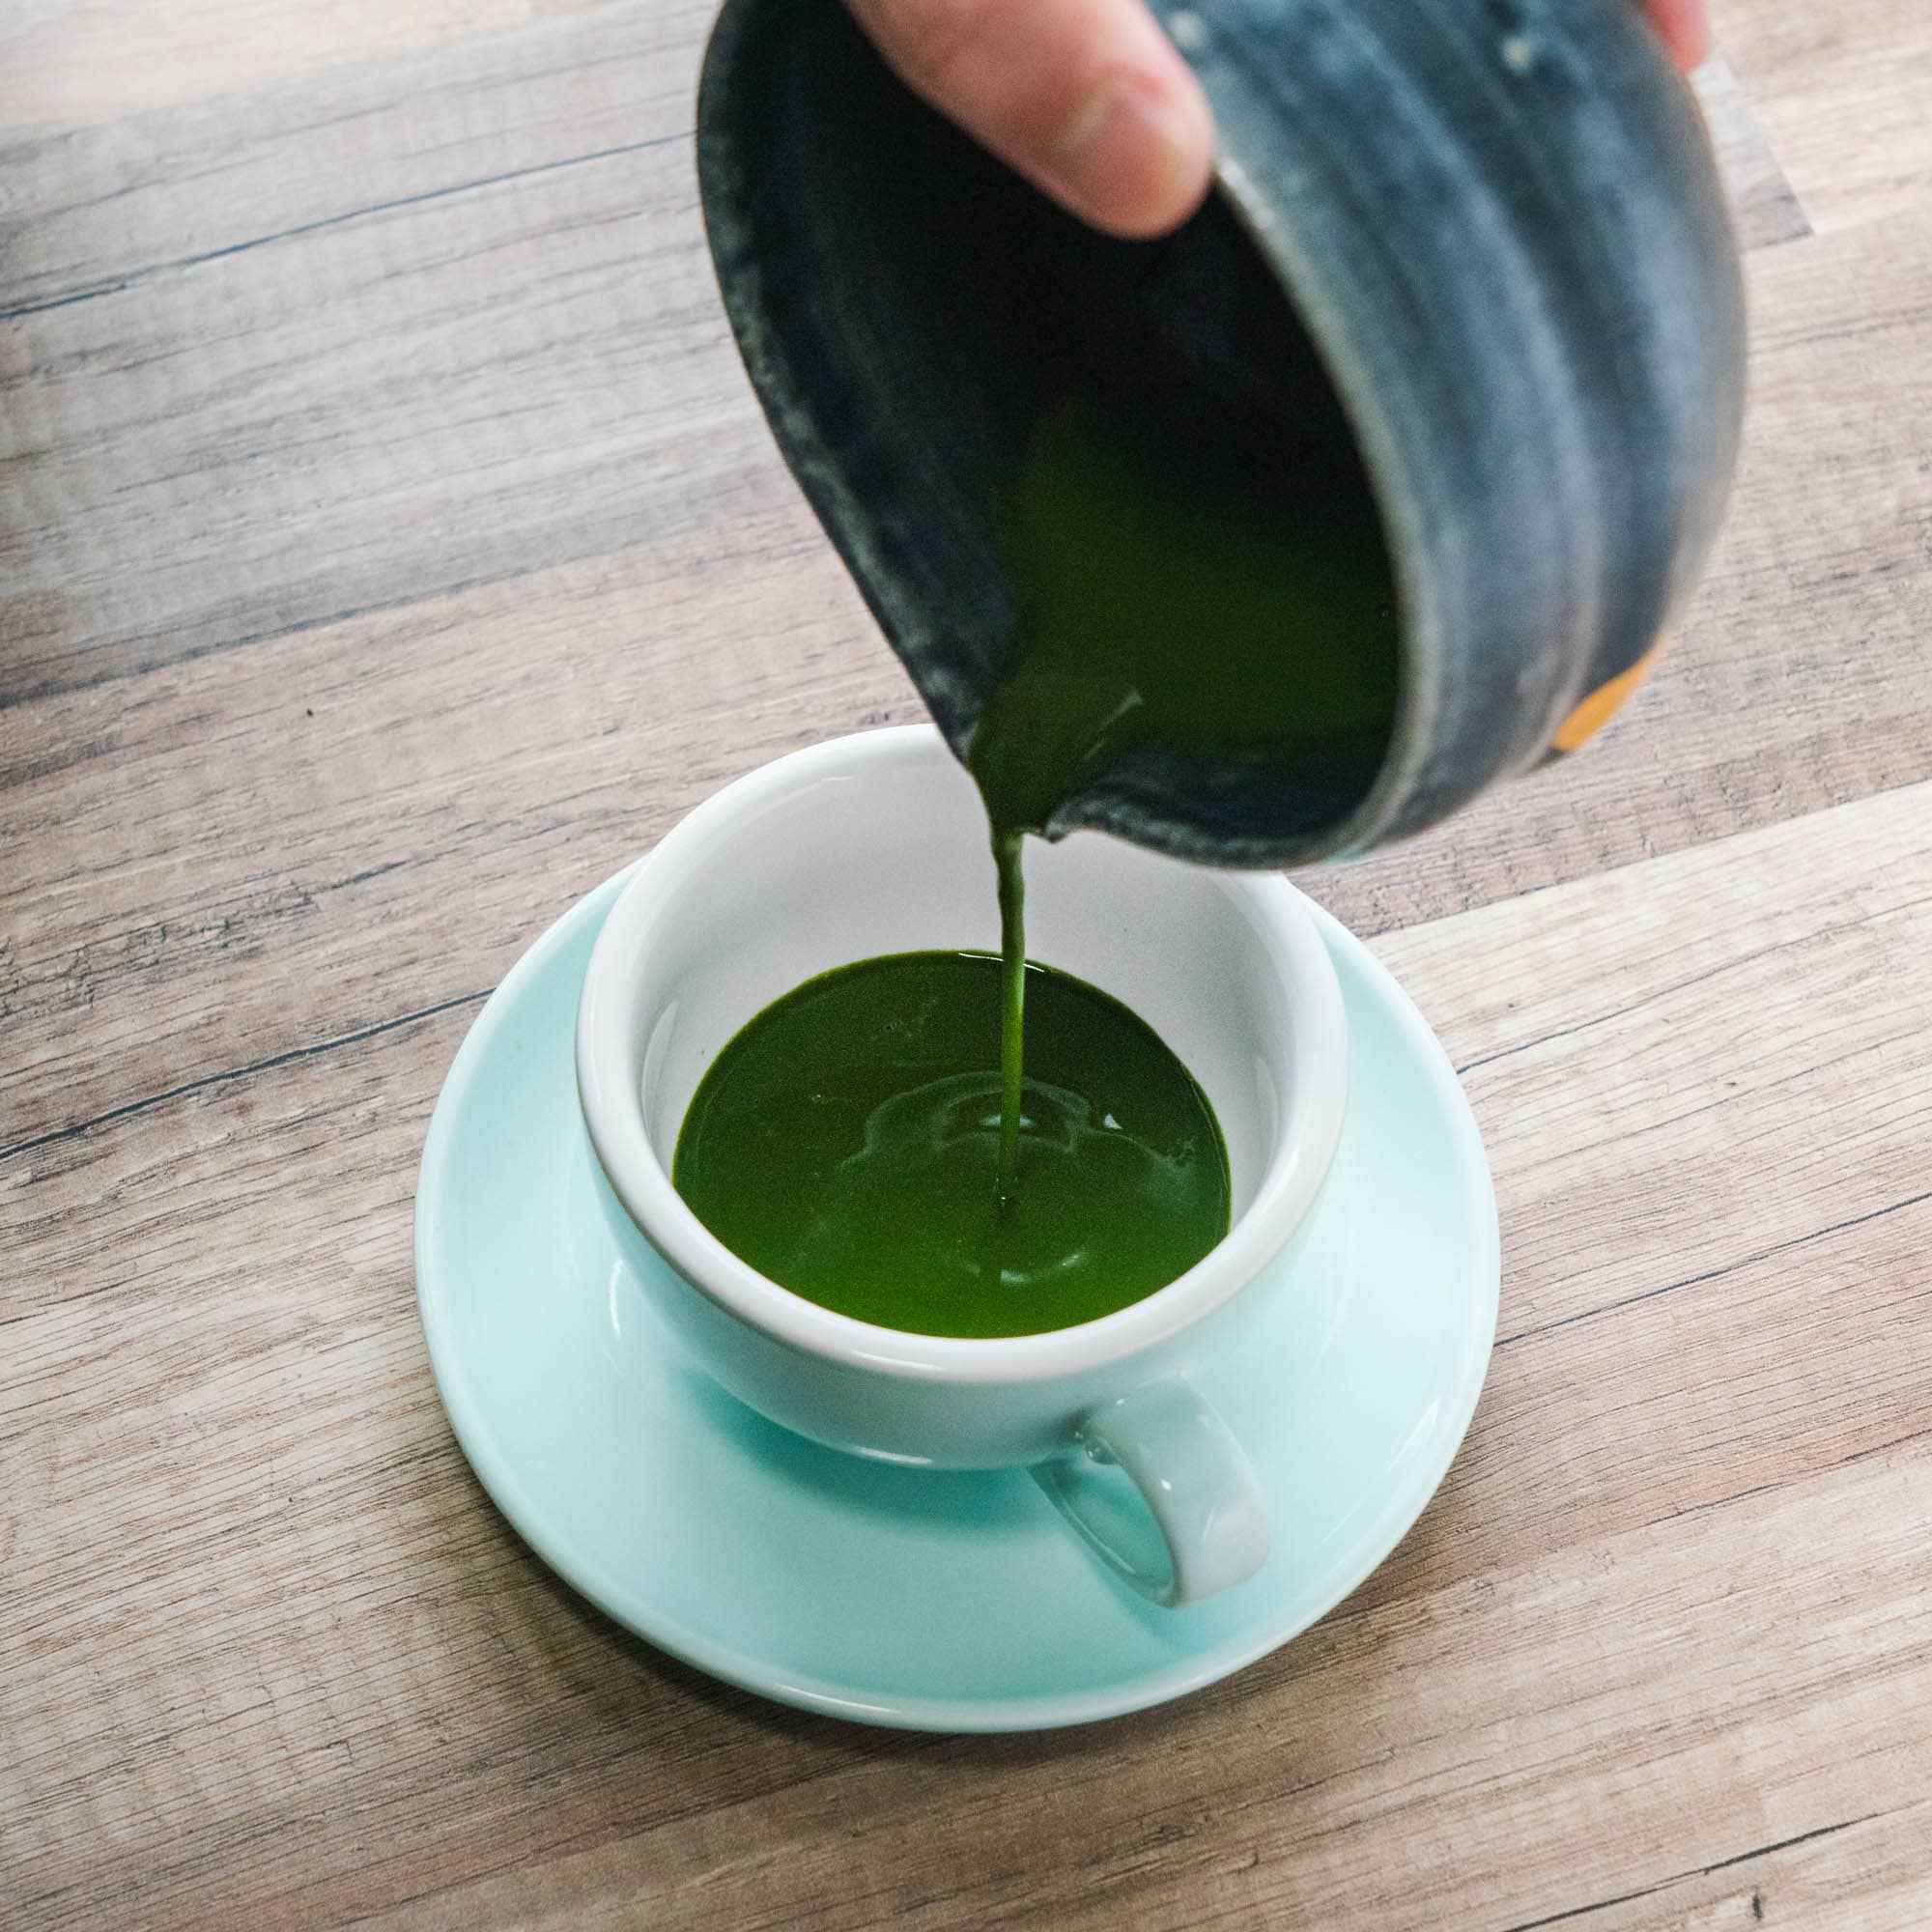 Matcha-spresso: A Solid Foundation for Matcha-based drinks